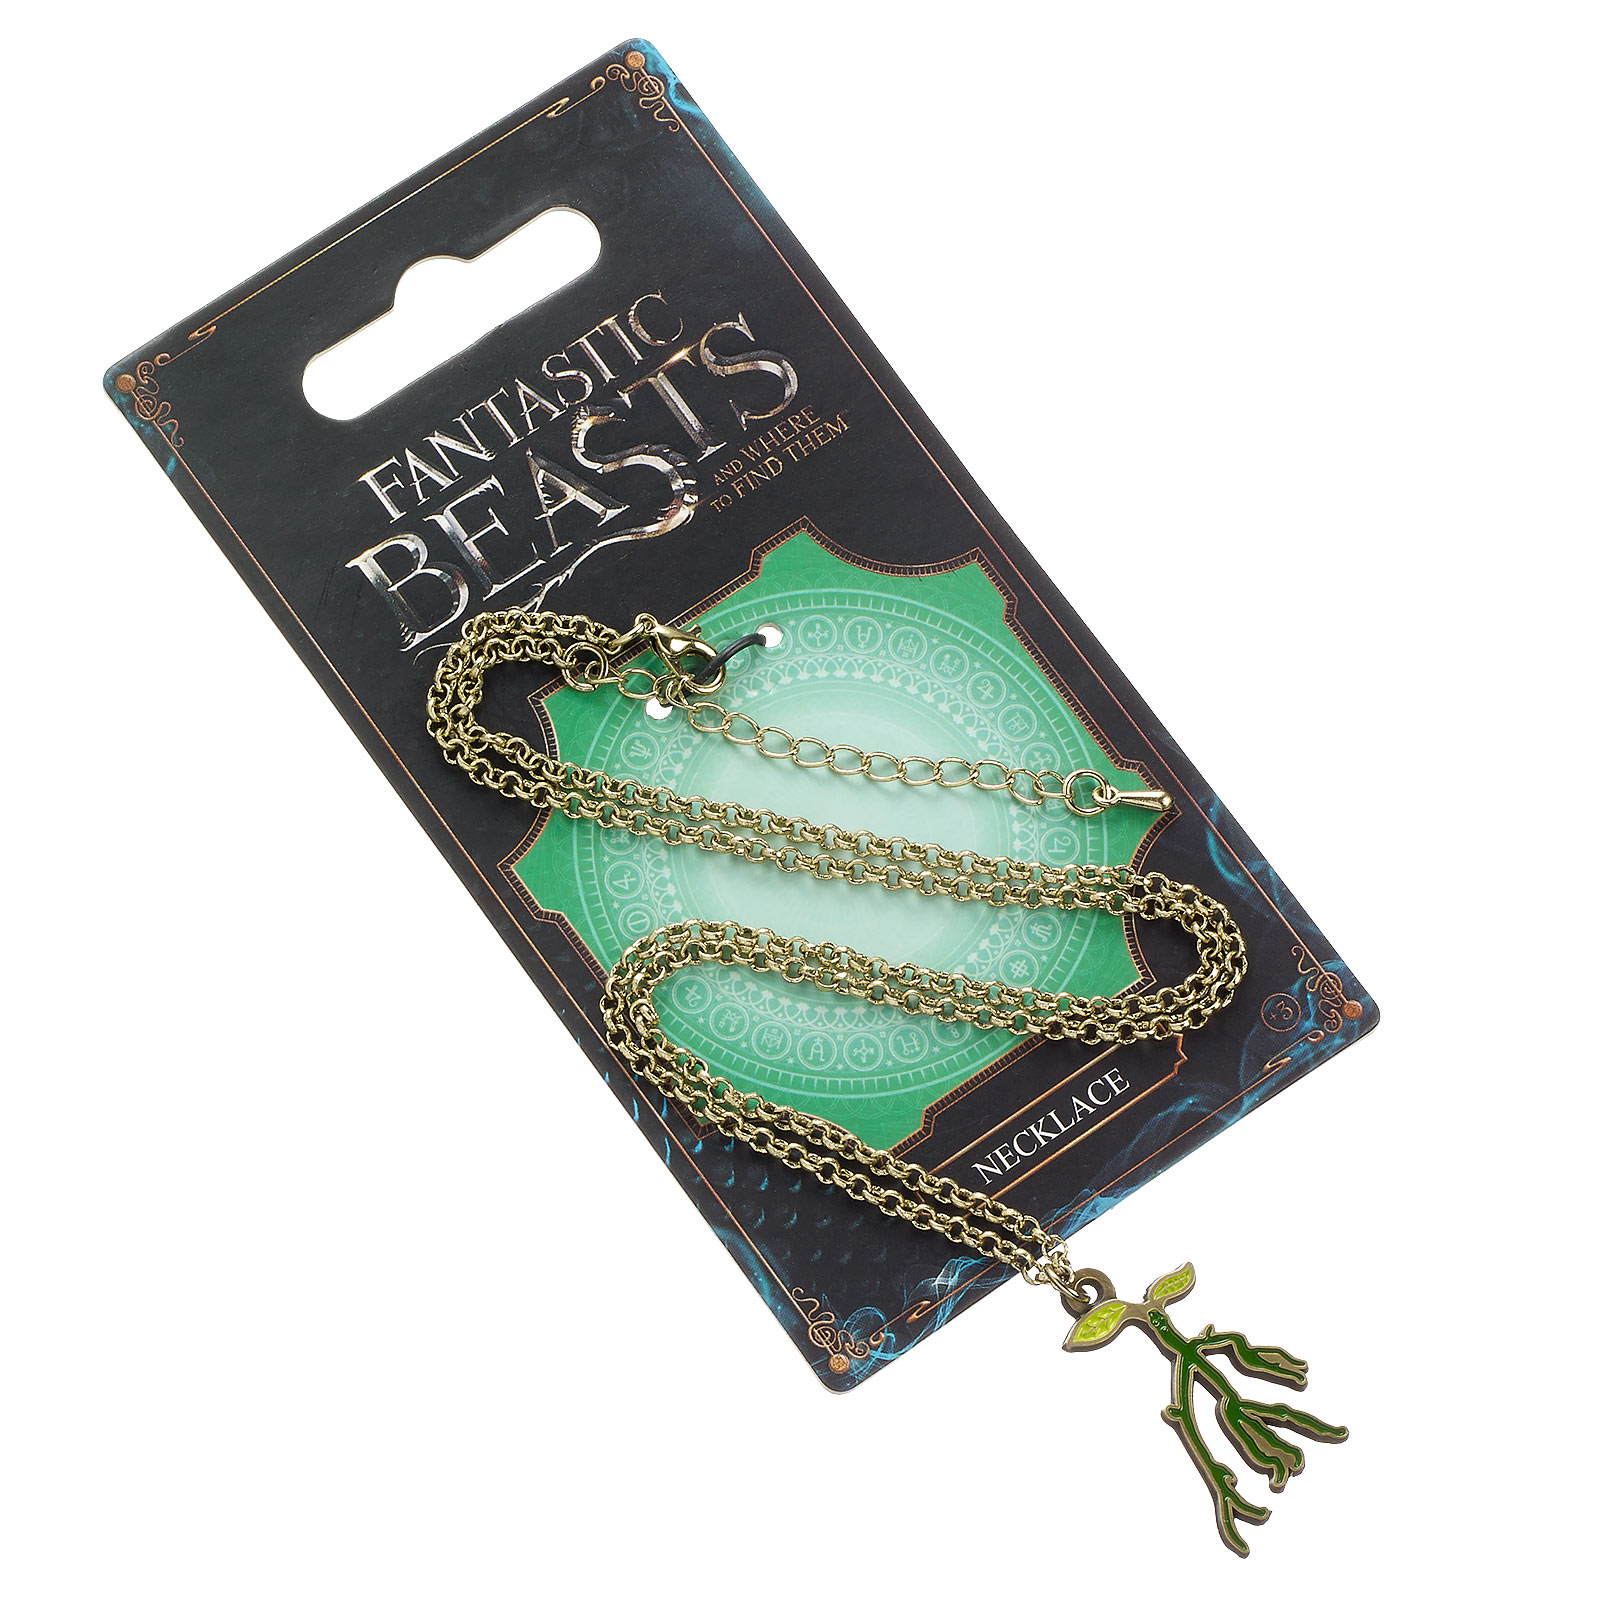 Fantastic Beasts - Bowtruckle Necklace